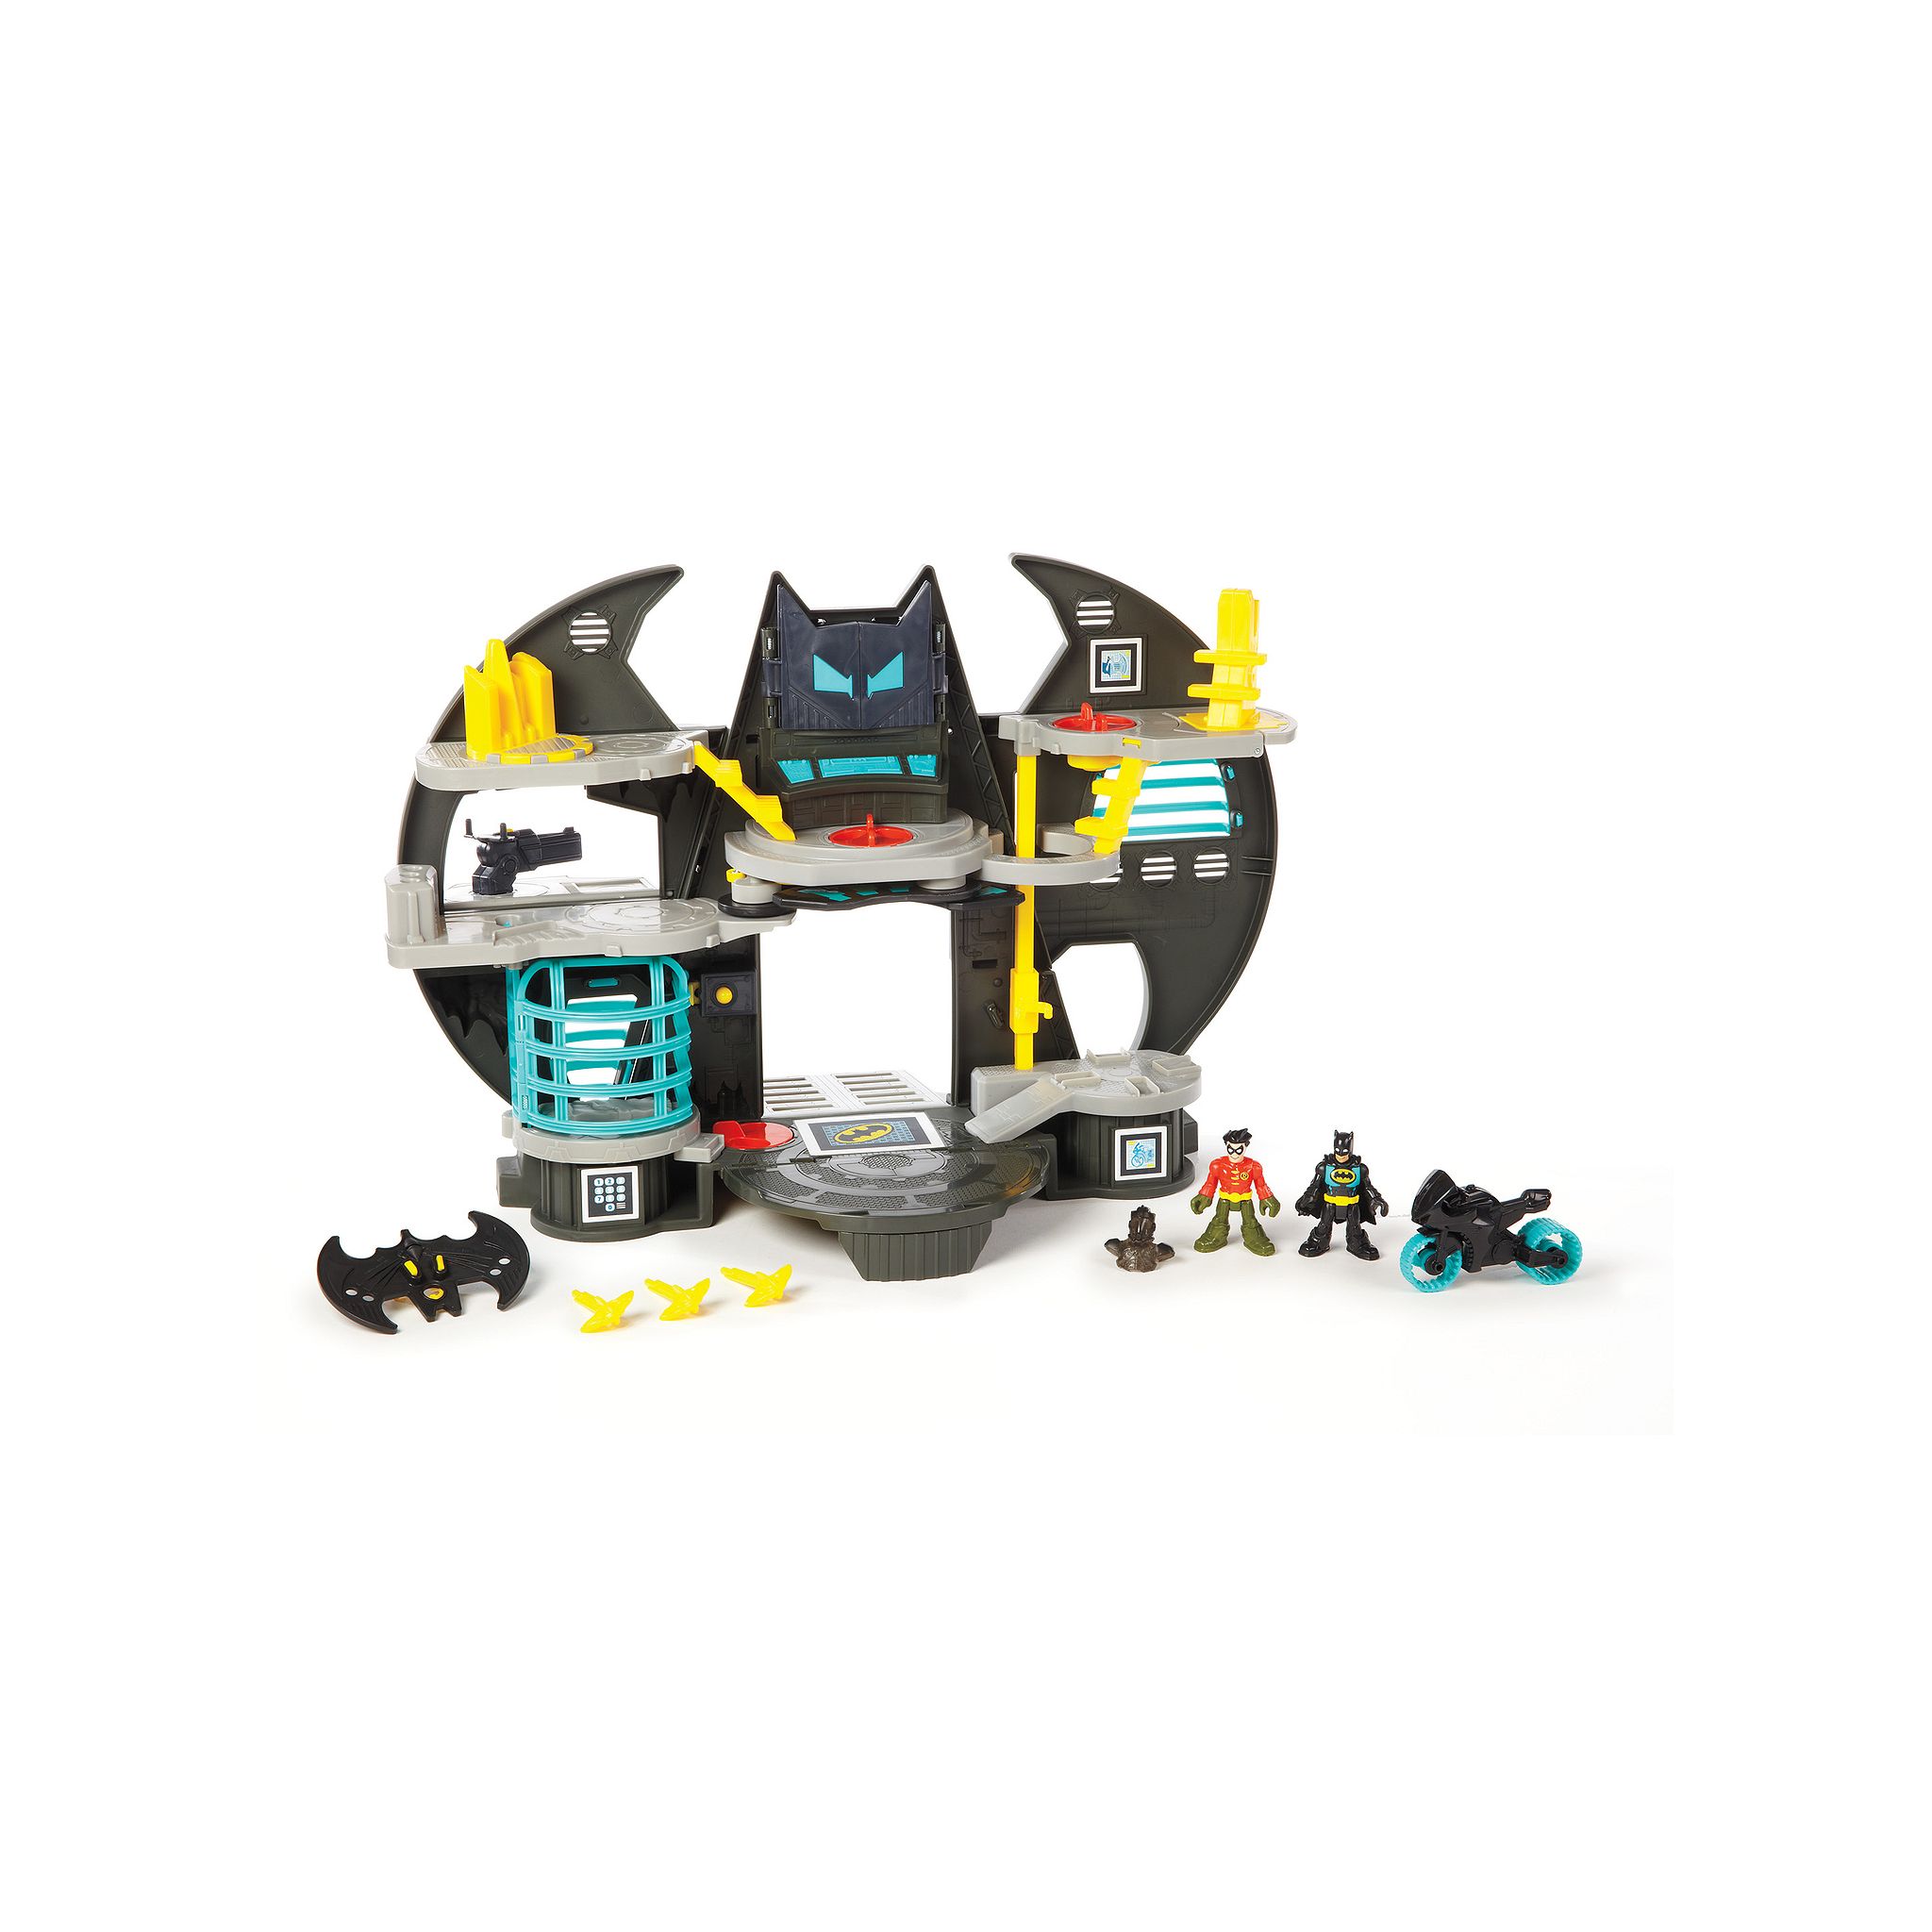 Batman Toys: Find Playtime Must-Haves for Fans of the Caped